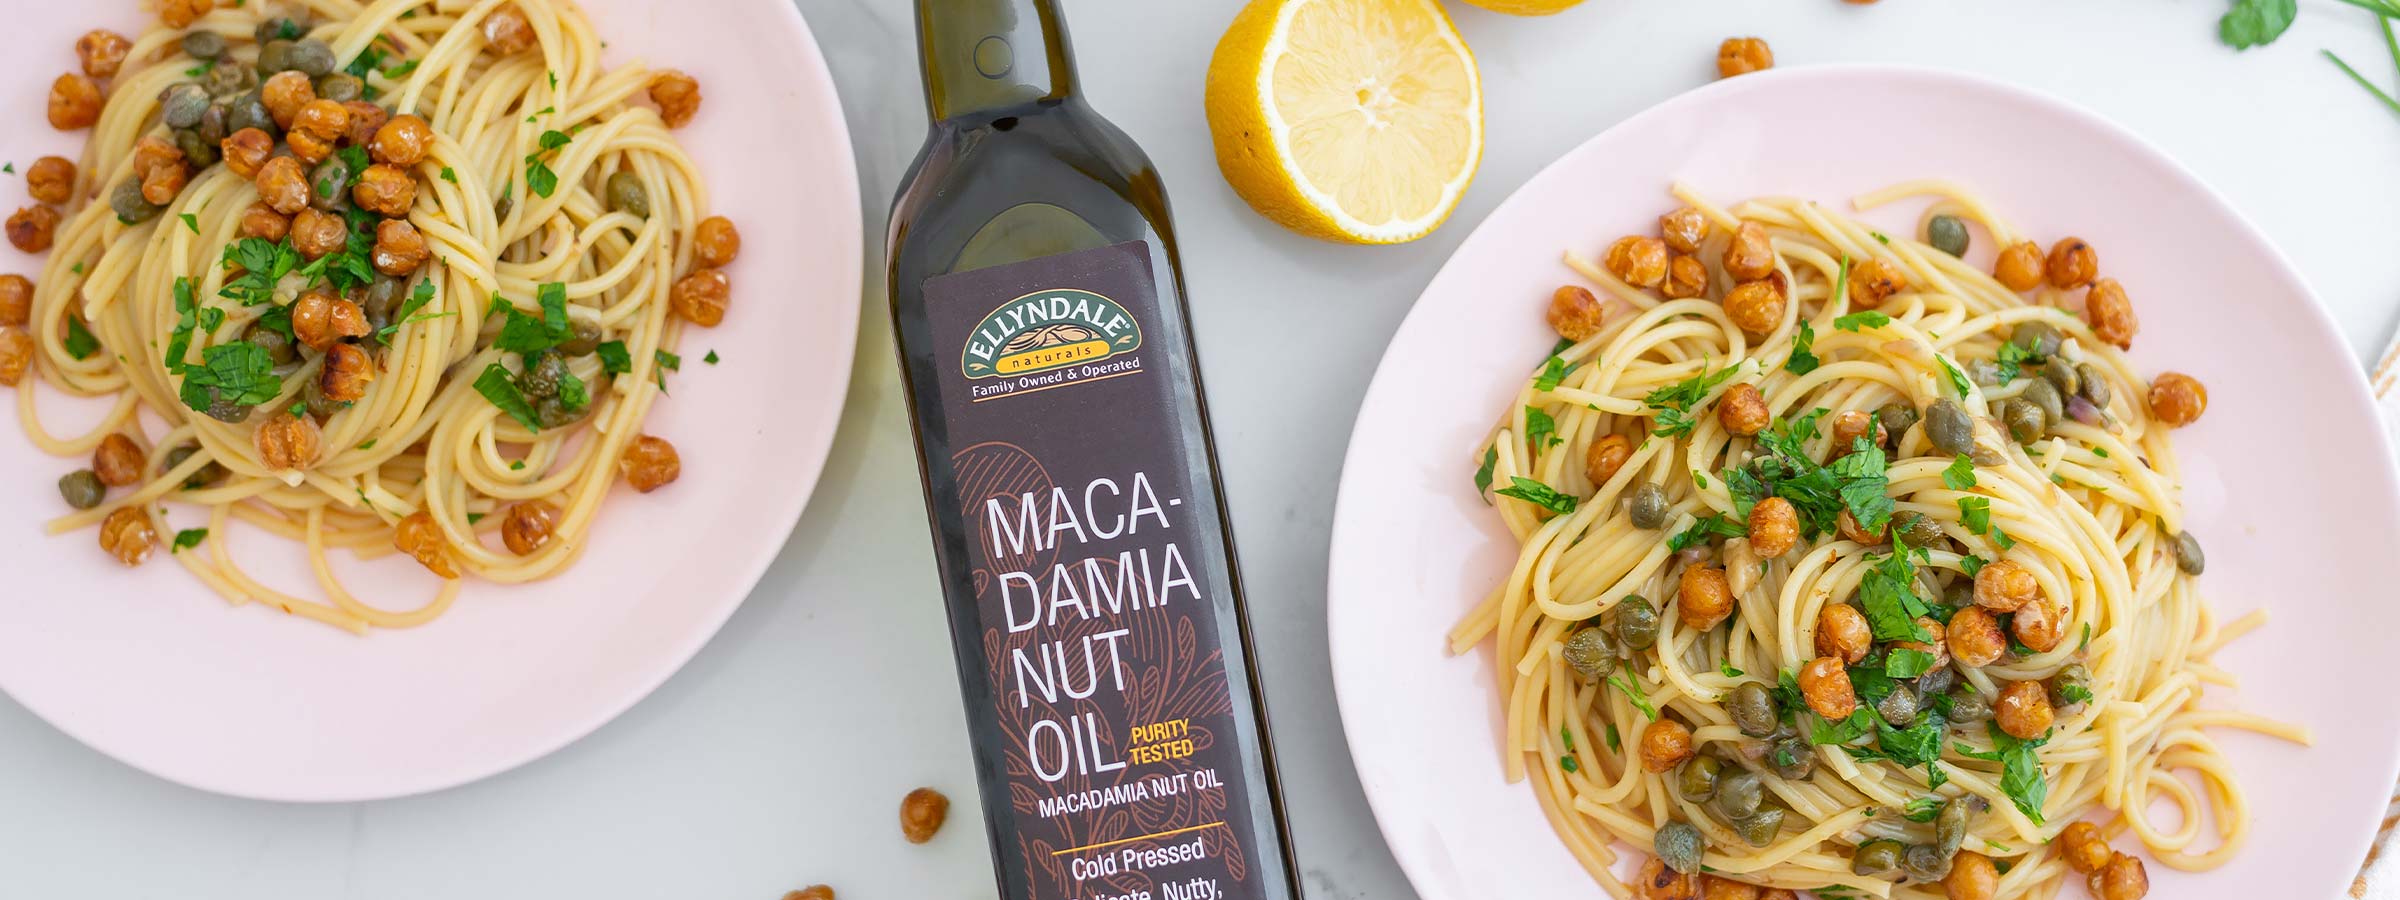 two bowls of lemon caper pasta with crispy chickpeas on top with a bottle of ellyndale macadamia nut oil inbetween 